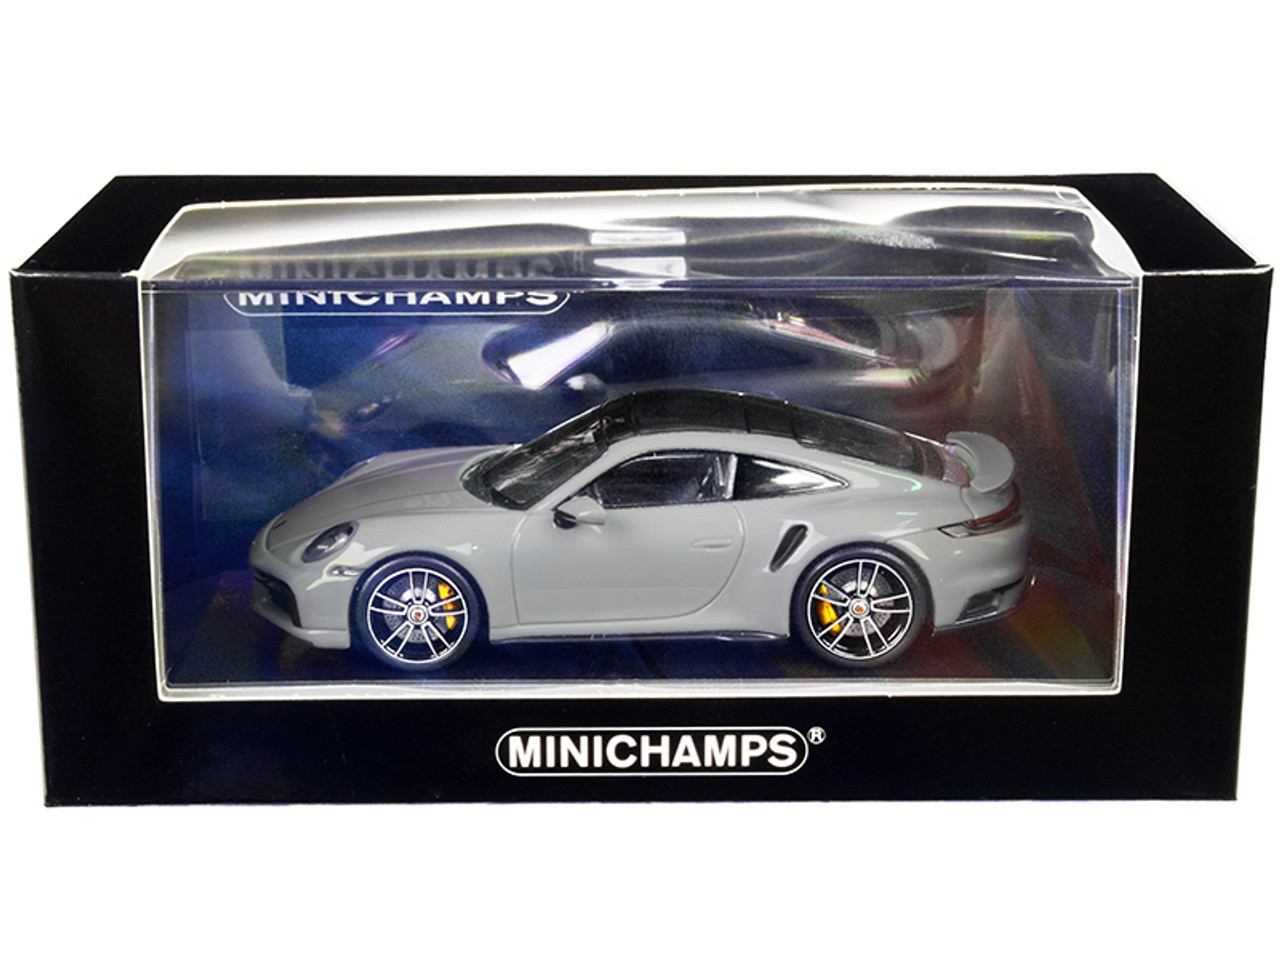 2020 Porsche 911 Turbo S Grey Limited Edition to 312 pieces Worldwide 1/43 Diecast Model Car by Minichamps